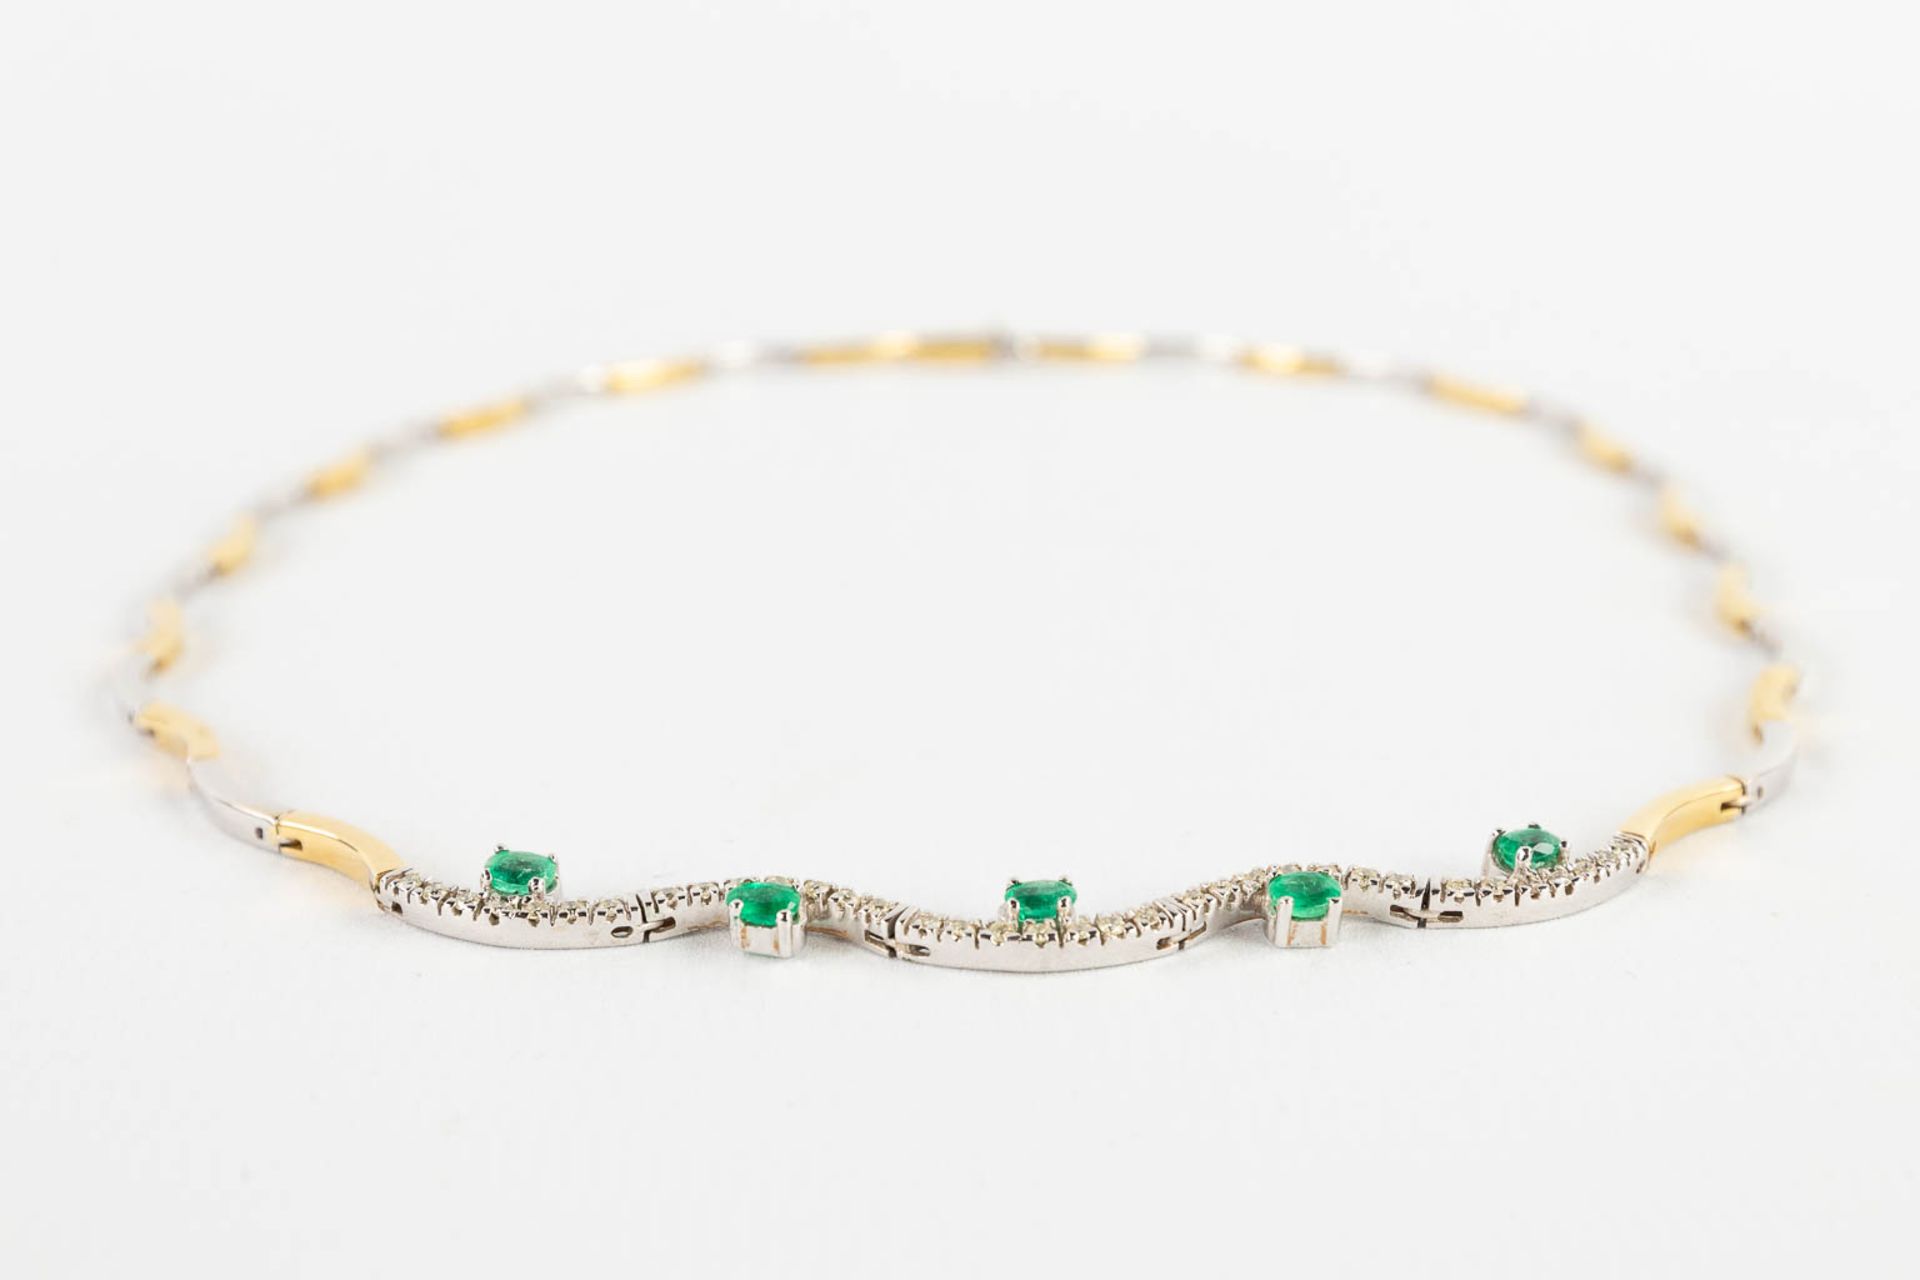 A necklace, 18 karats yellow and white gold, decorated with green, probably, emeralds. 24,67g. - Image 5 of 11